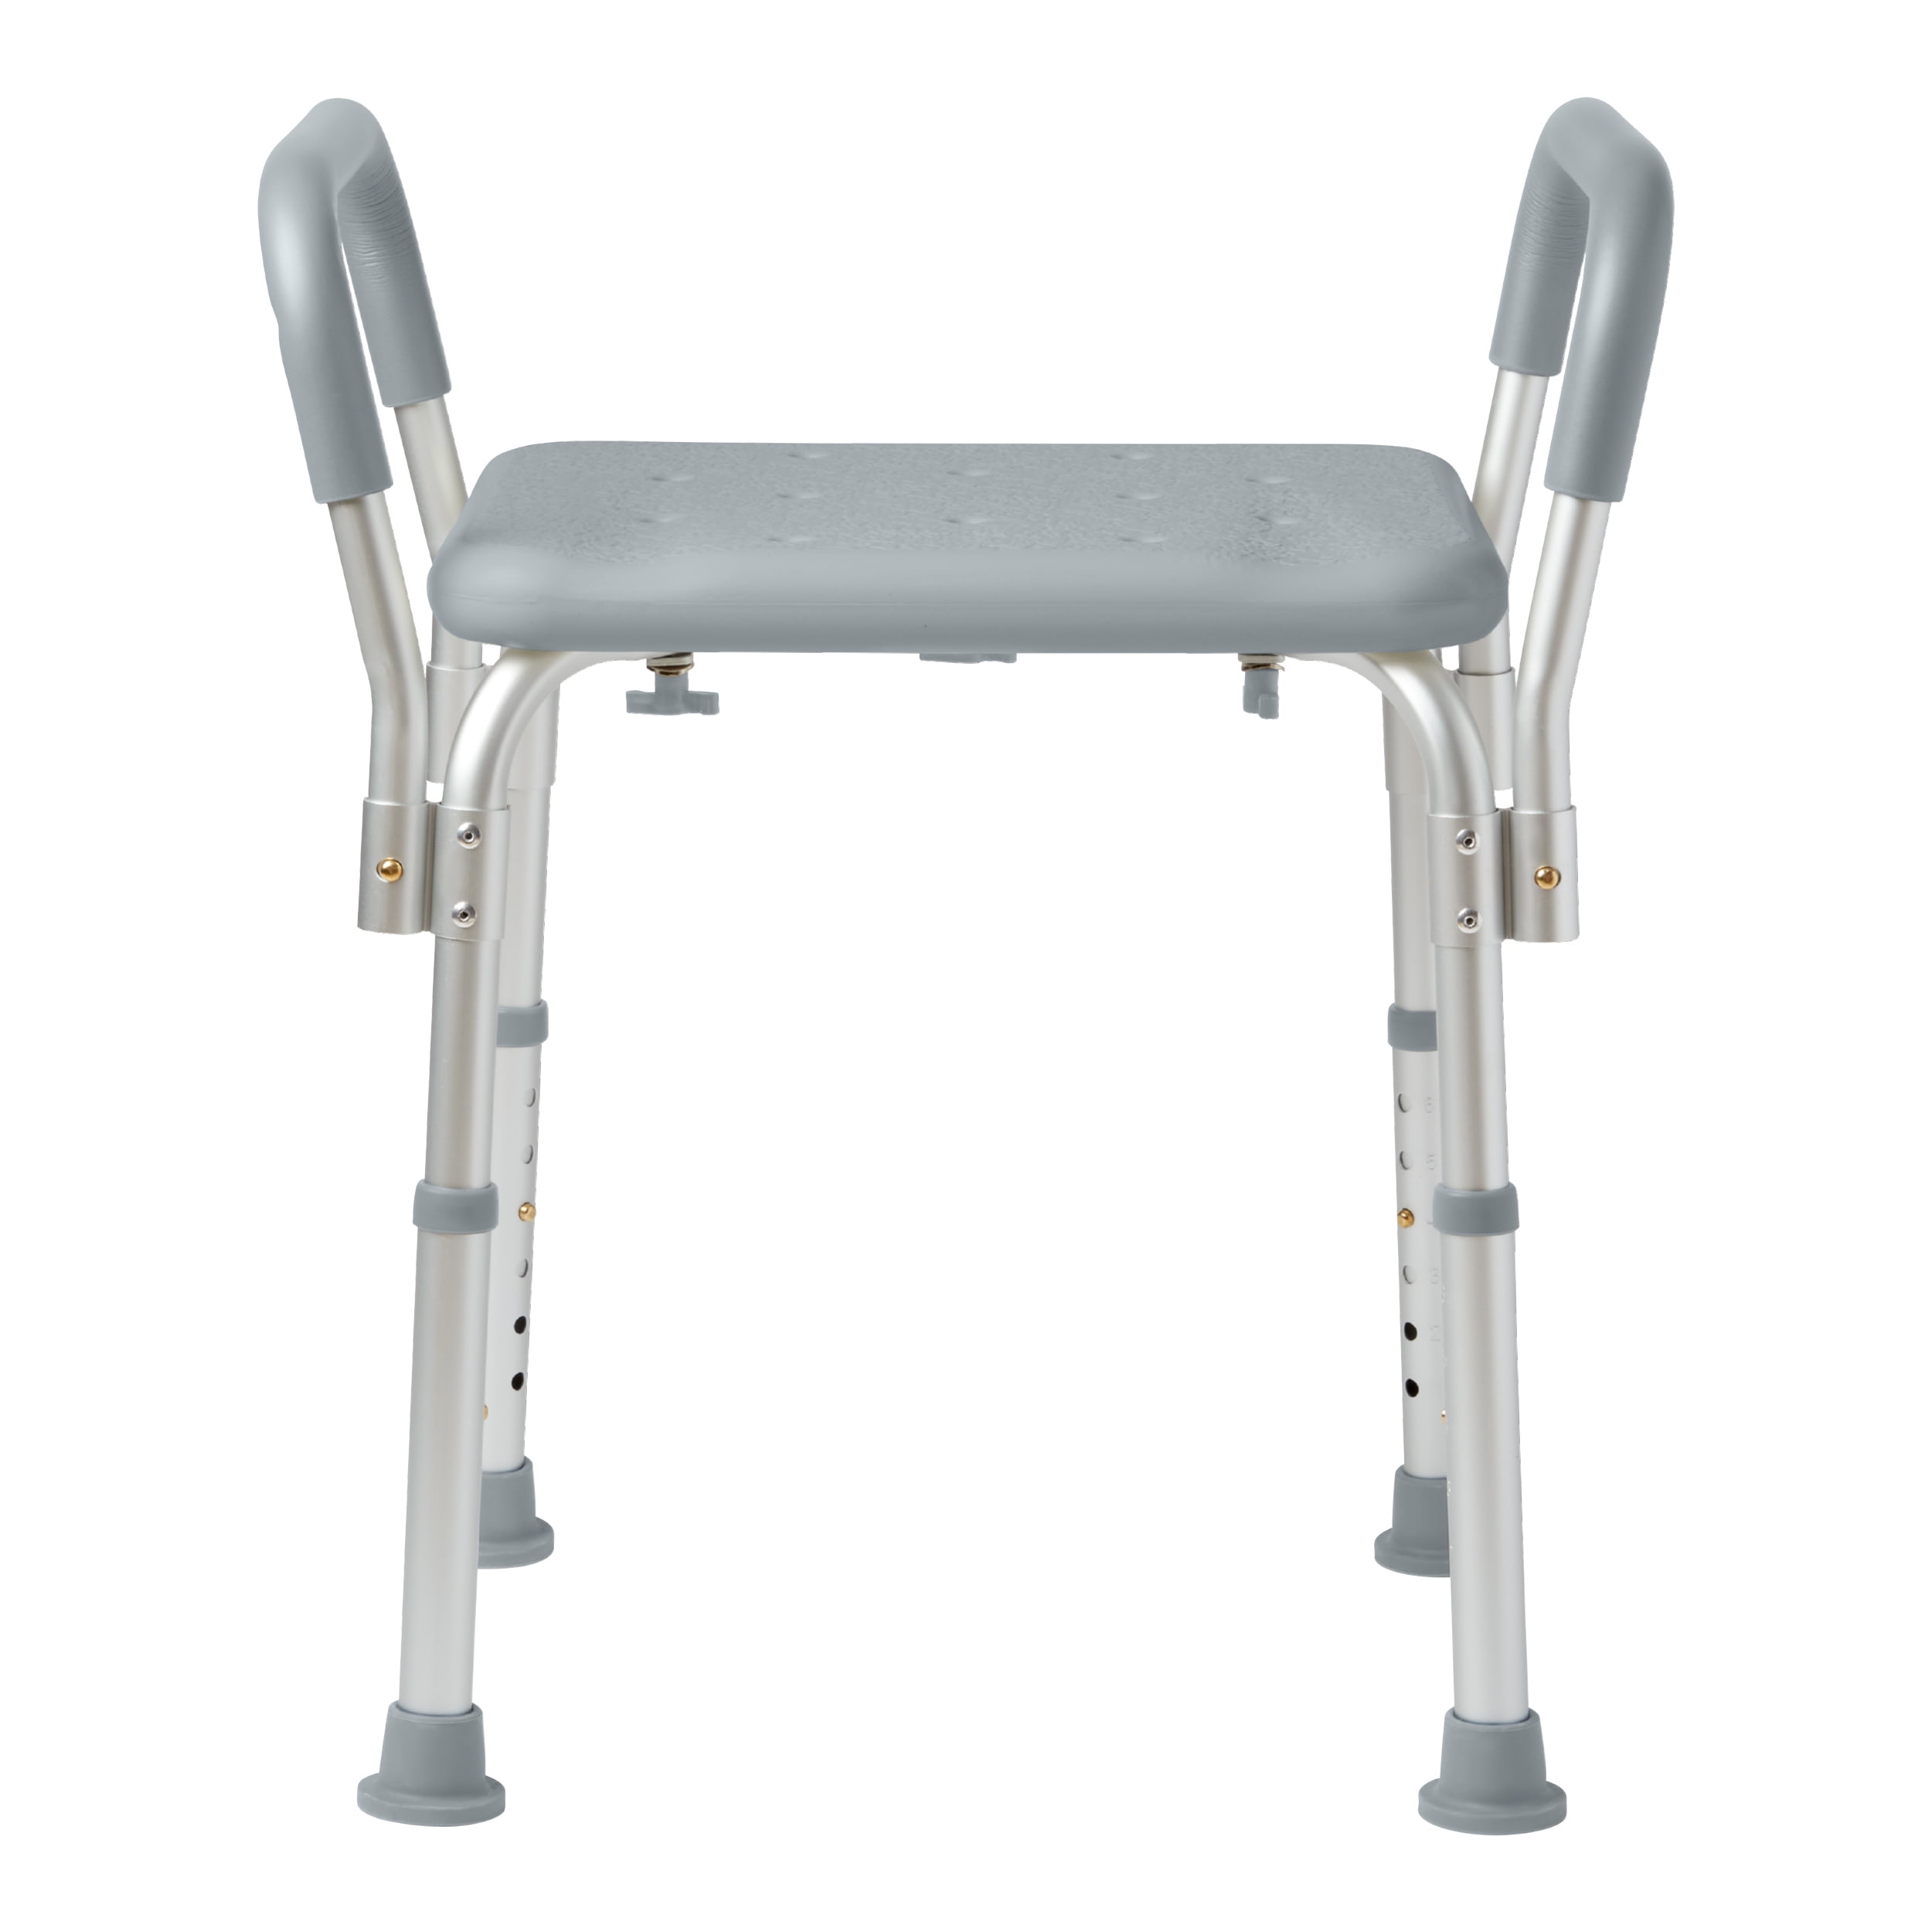 Medline Comfortable Folding Wheelchair with Swing-Back Desk-Length Arms and  Swing-Away Footrests, 20”W x 16”D Seat